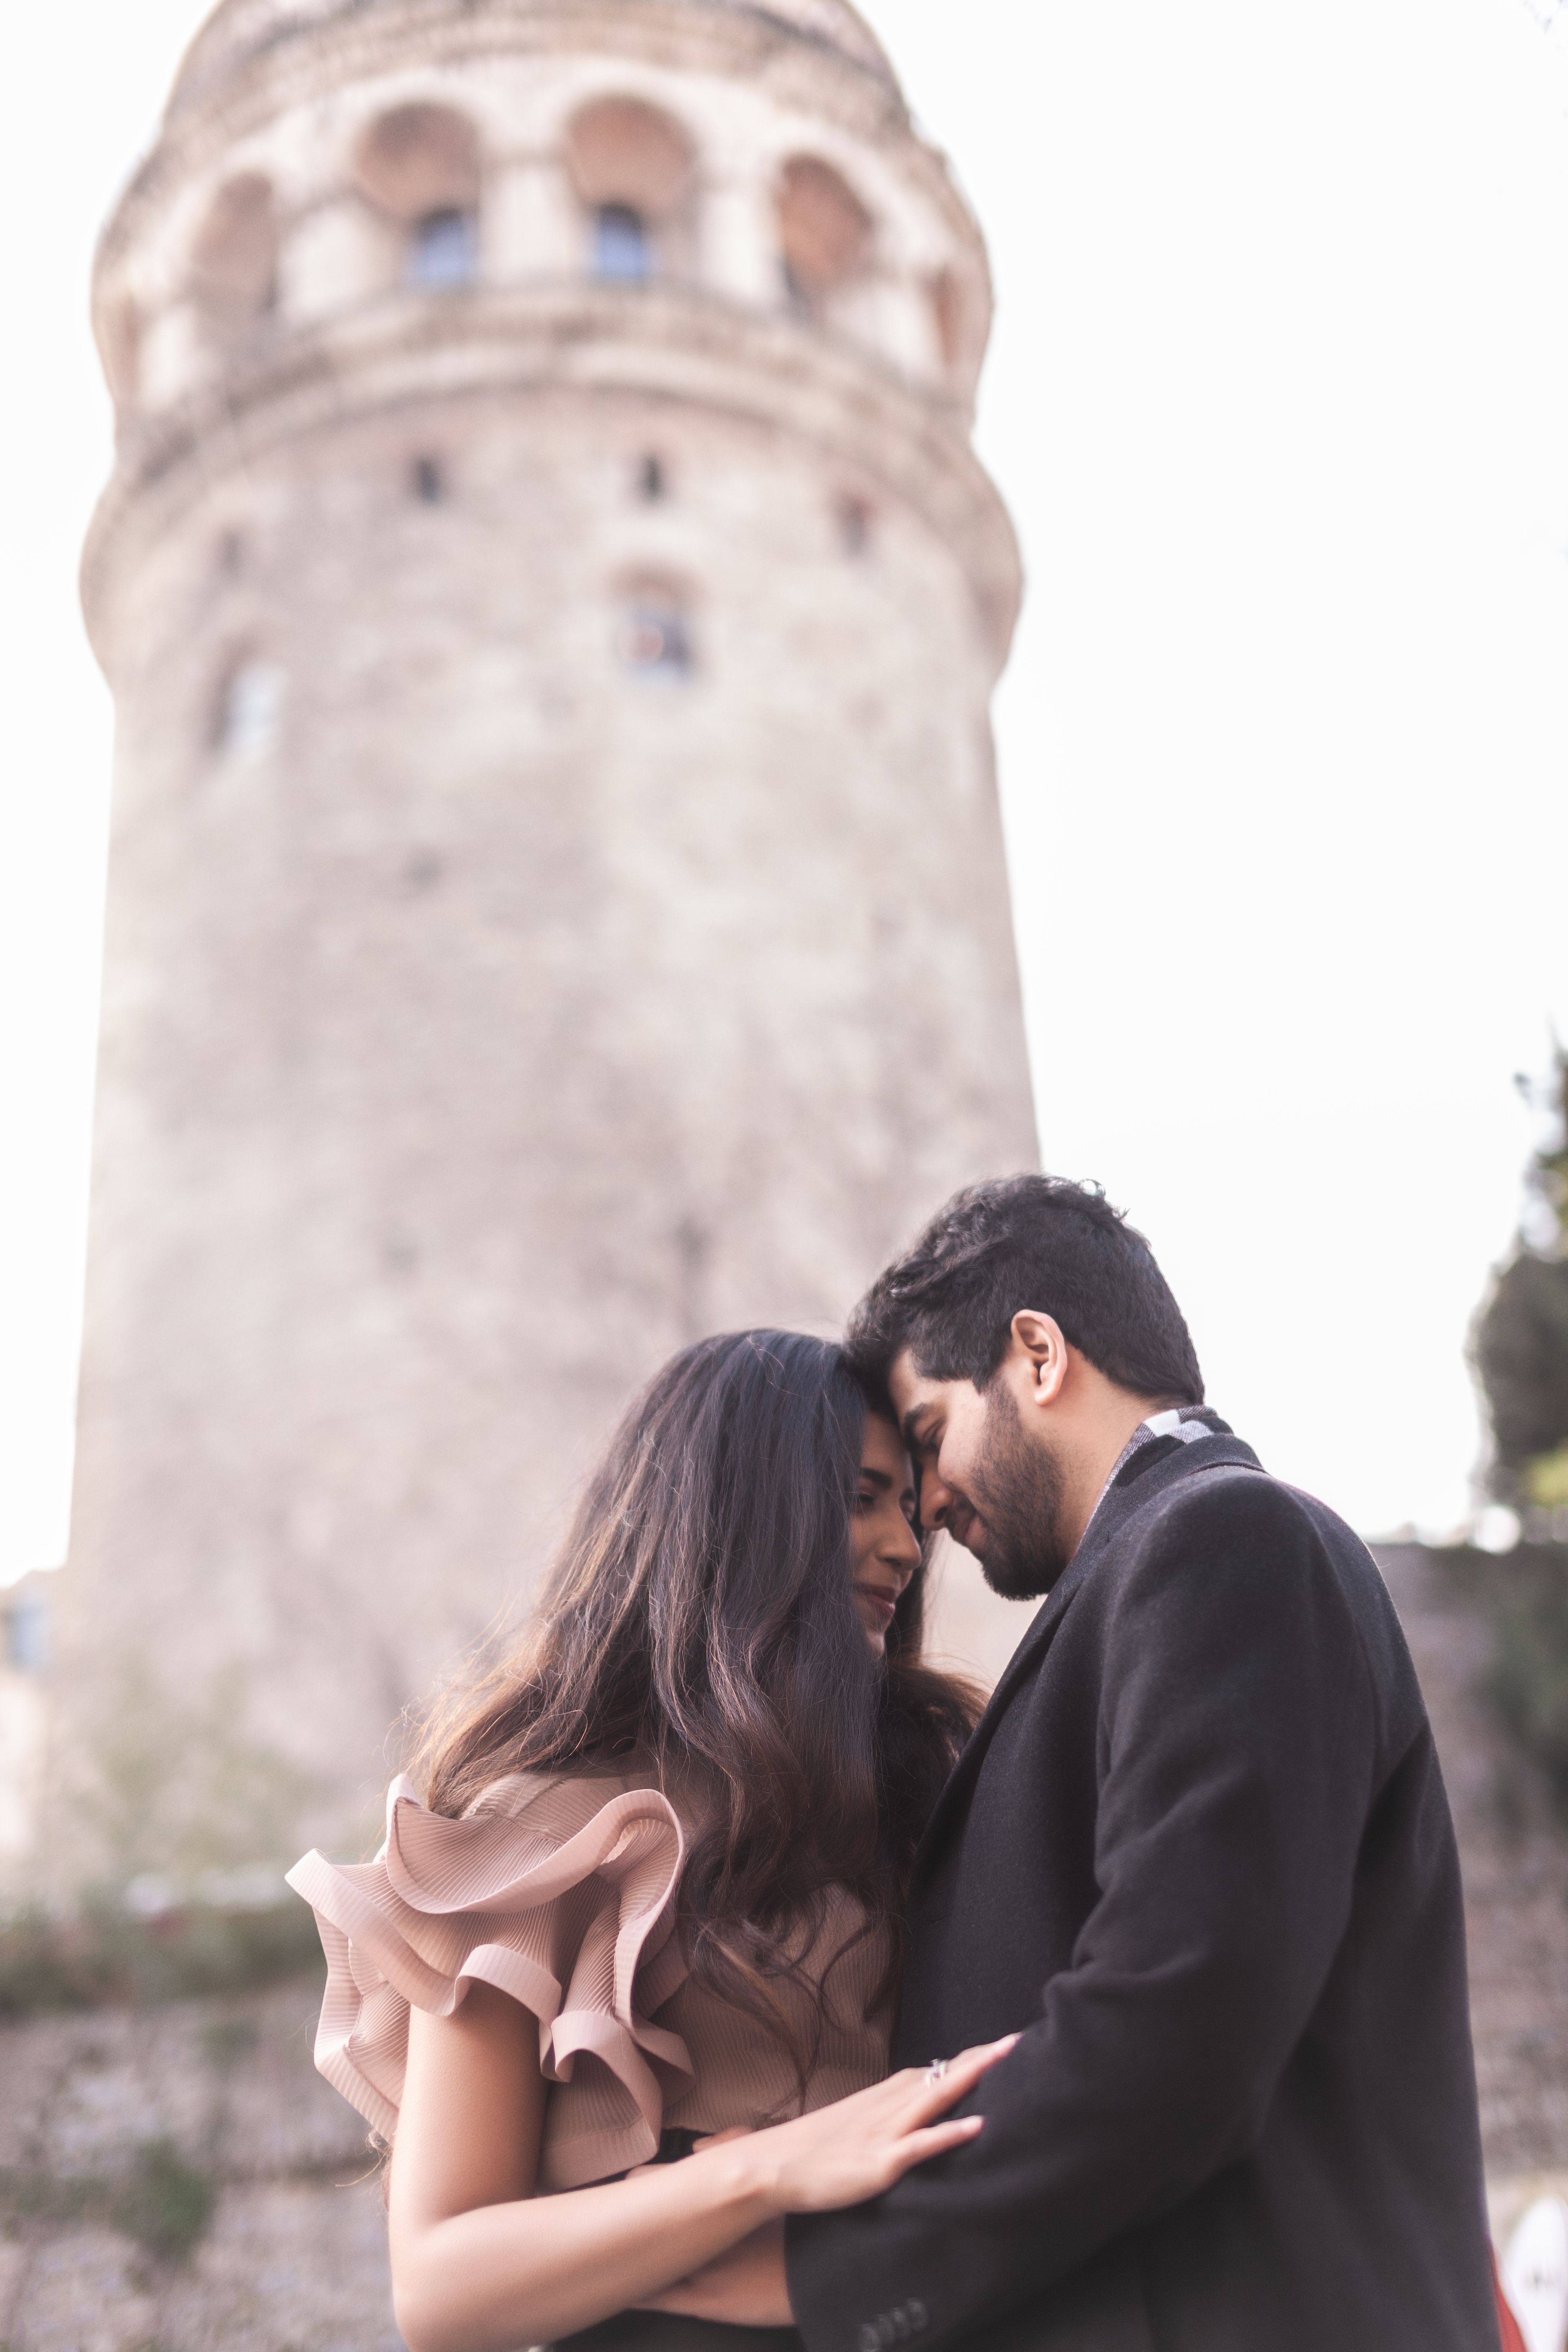 Best dating apps for relationships in Istanbul